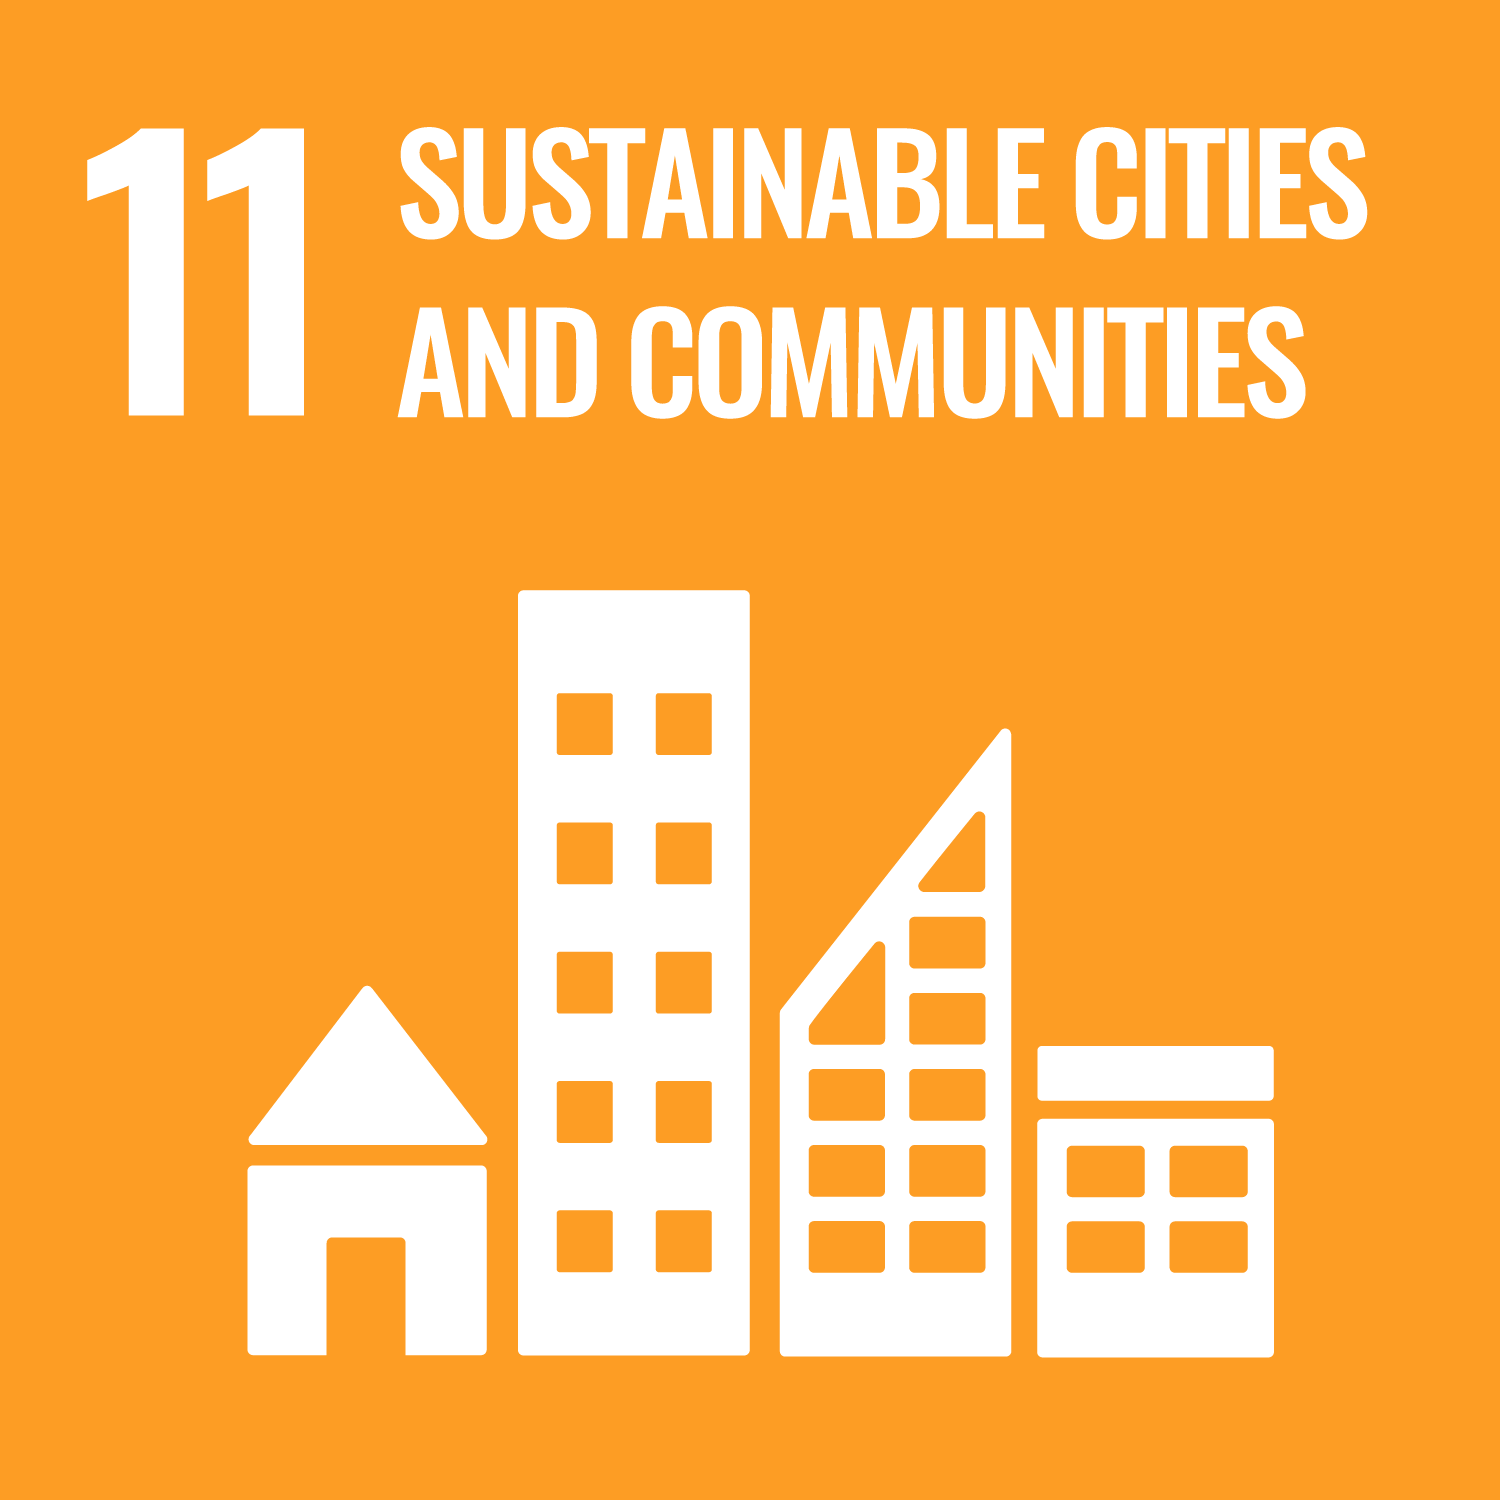 SDG icon # 11: sustainable cities and communities